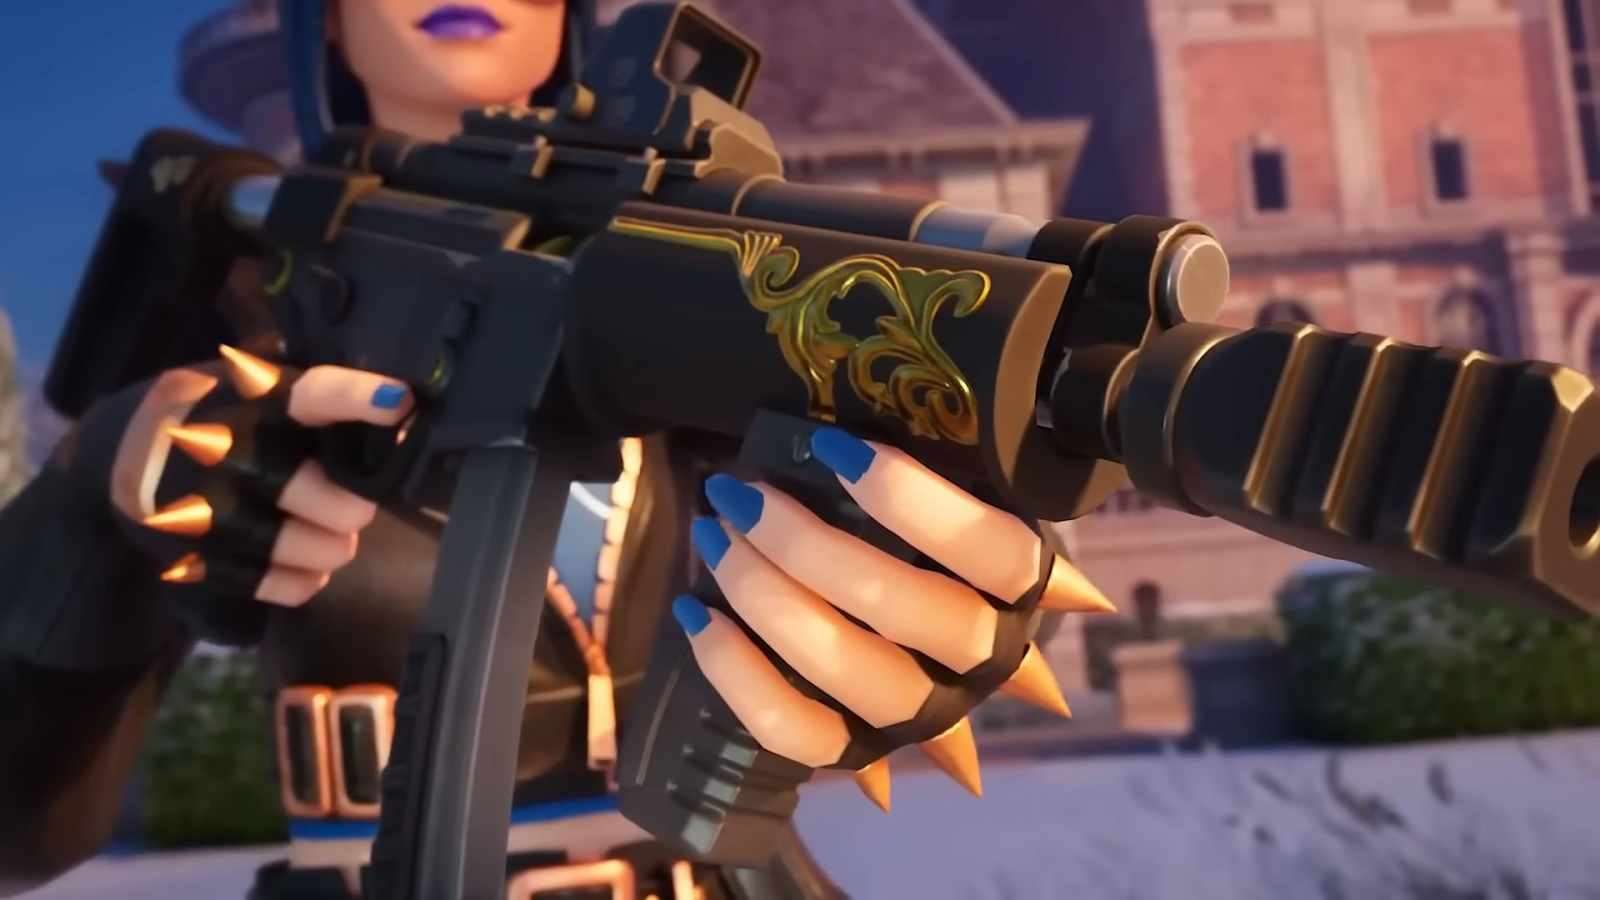 Fortnite player holding a weapon in Chapter 5.